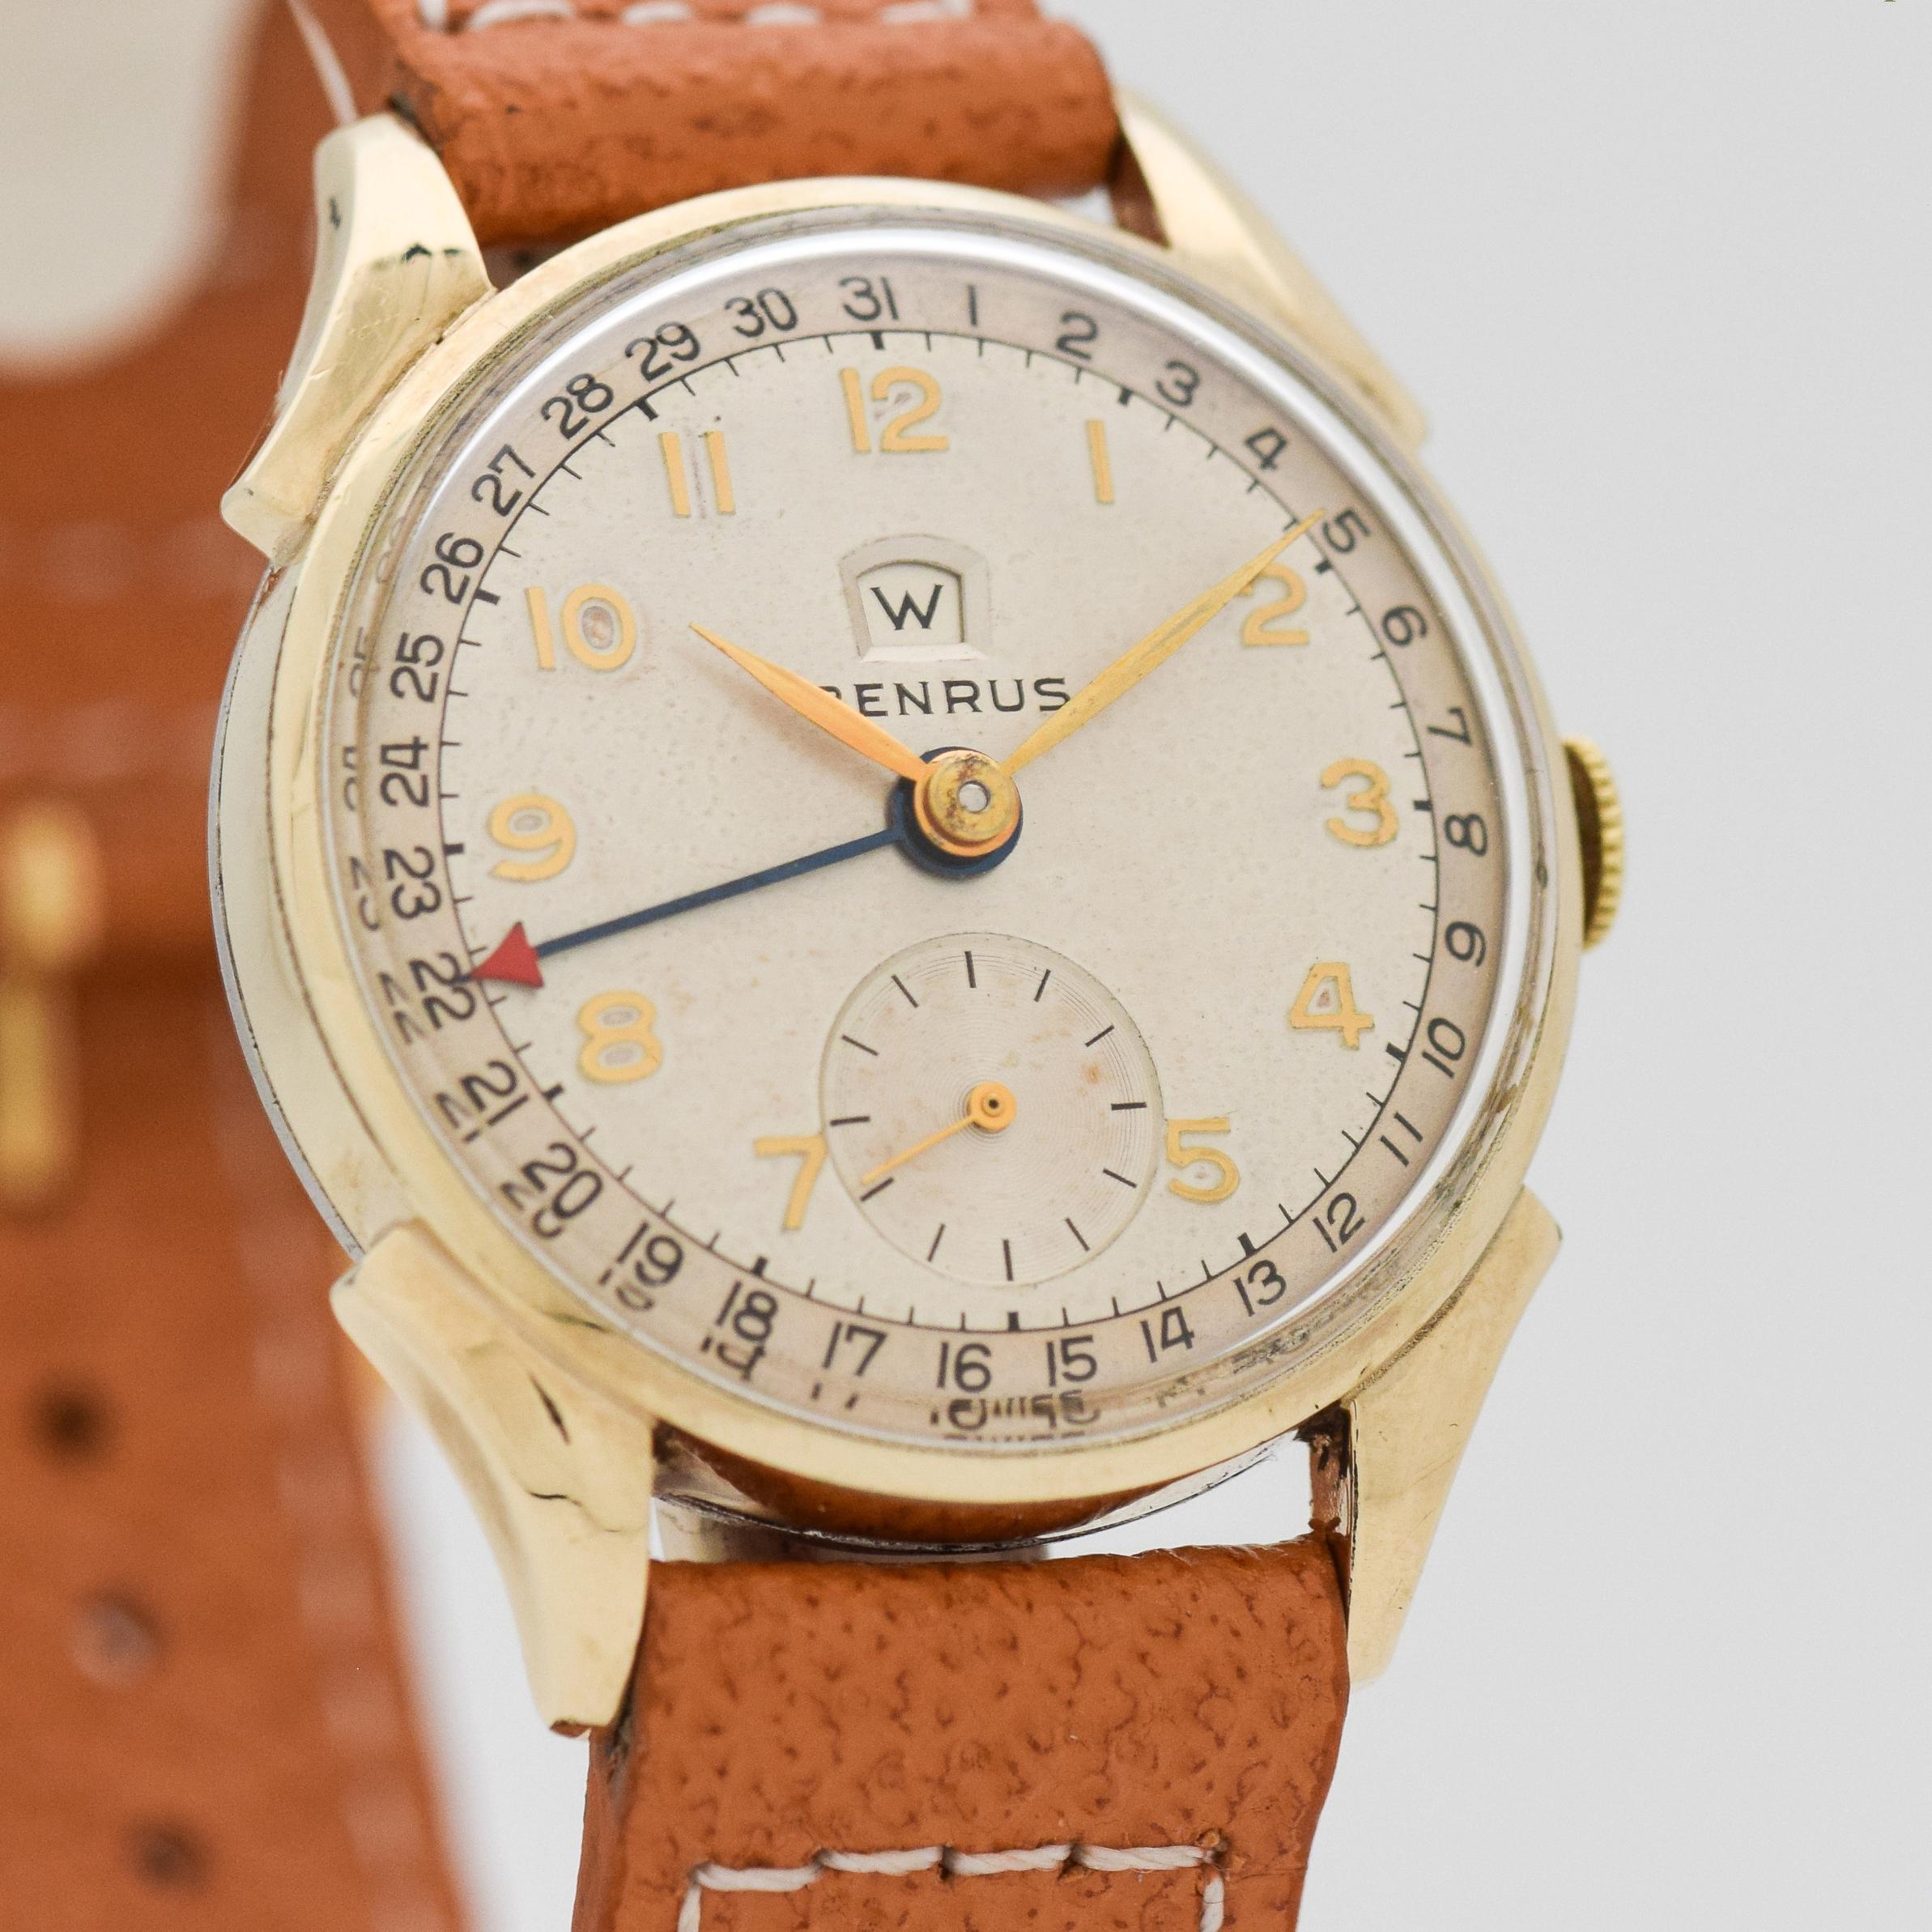 1950's Vintage Benrus Day-Date Ref. CE 13 10k Yellow Gold Plated watch with Original Silver Dial with Applied Gold Color Arabic Numbers. 30mm x 36mm lug to lug (1.18 in. x 1.42 in.) - 17 jewel, manual caliber ETA movement. Equipped with a Leather